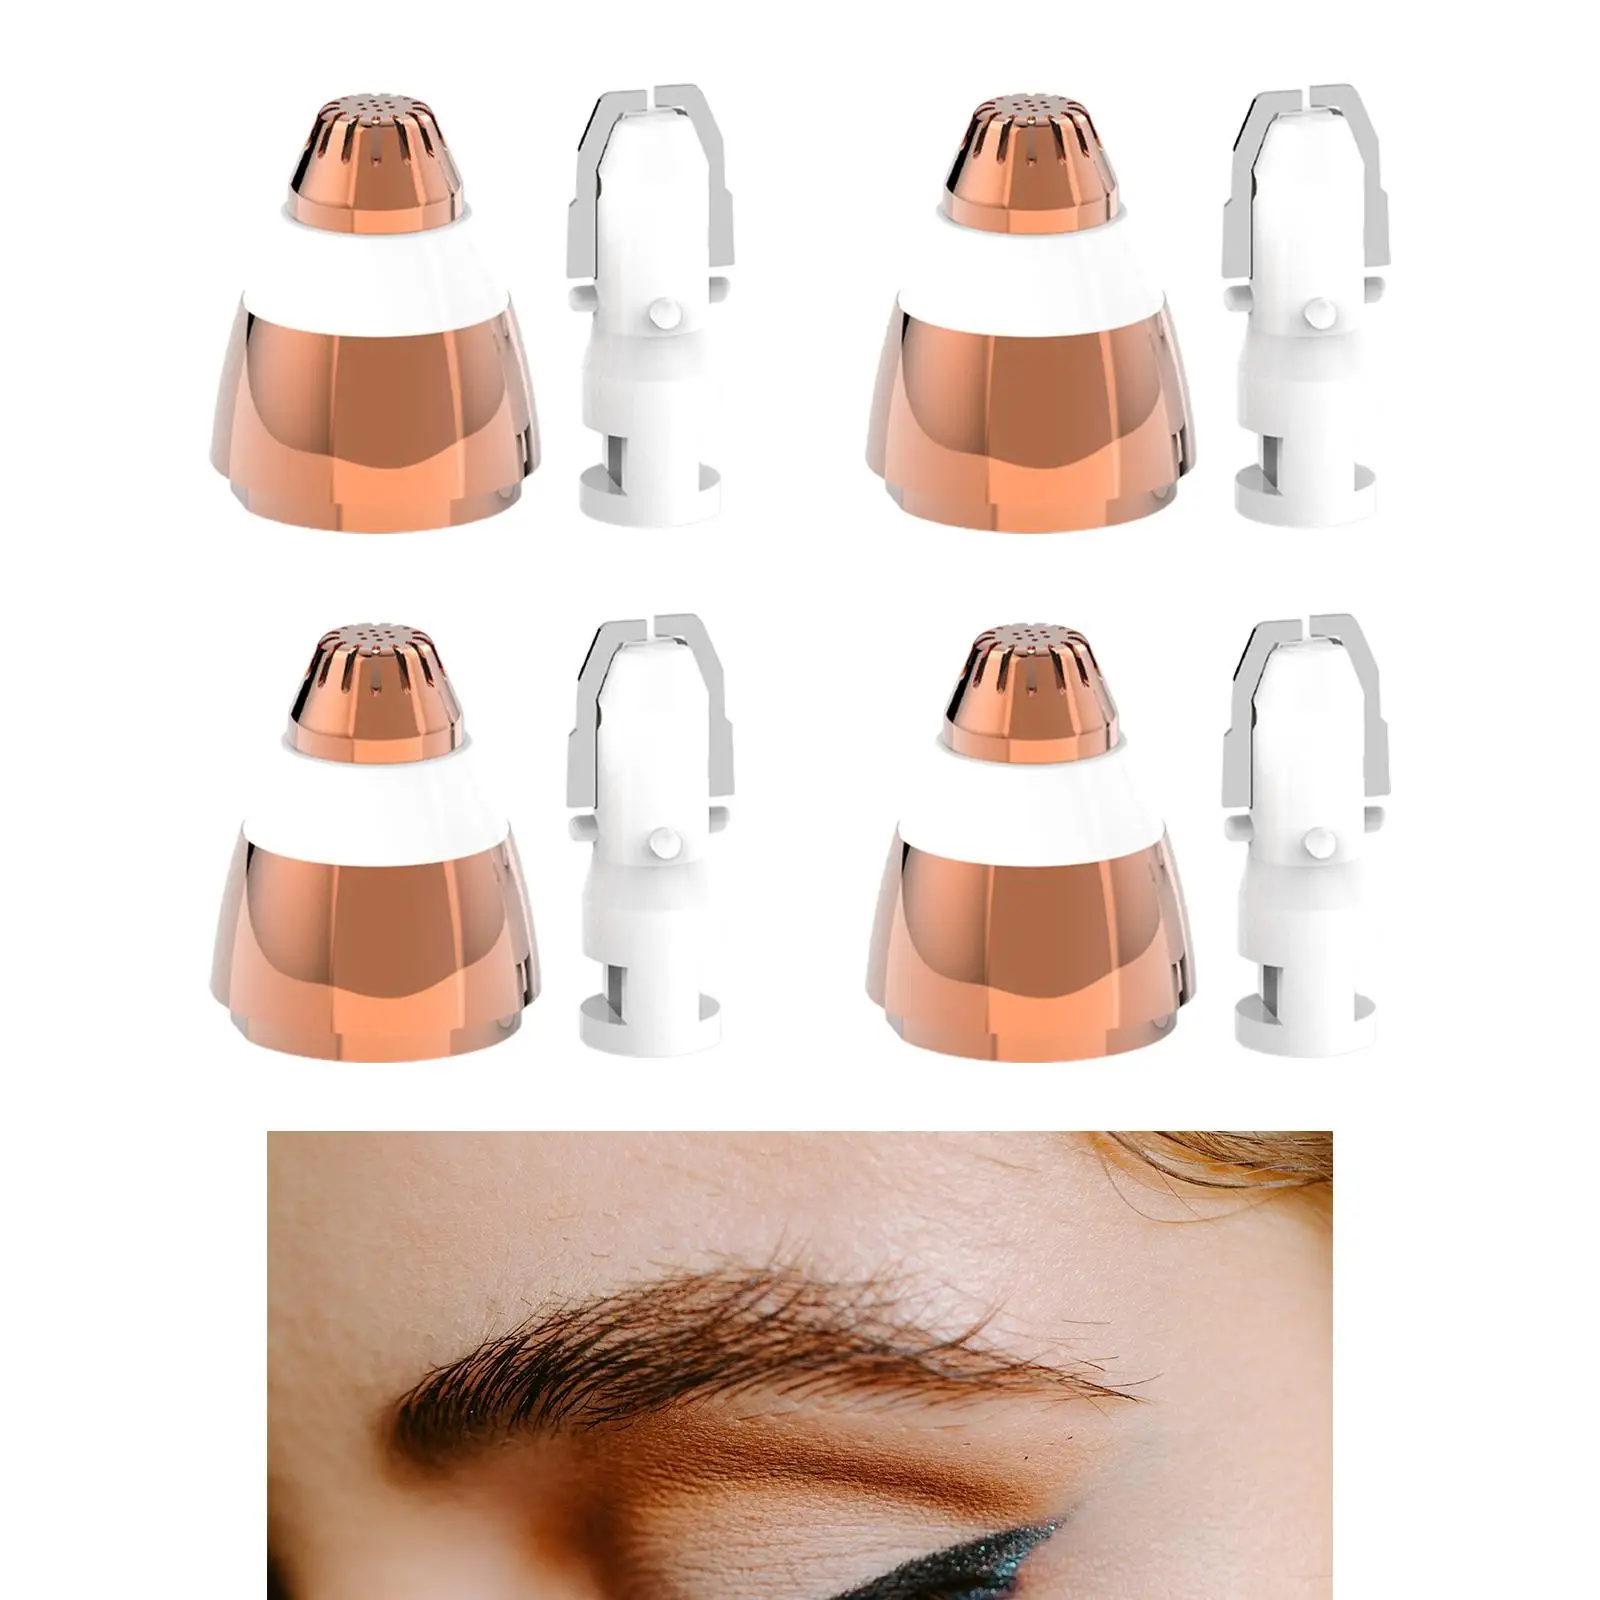 4 Sets Eyebrow Hair Remover Replacement Heads Facial Hair Remover Women Eyebrow Facial Hair Removal Tool Shaving Supplies